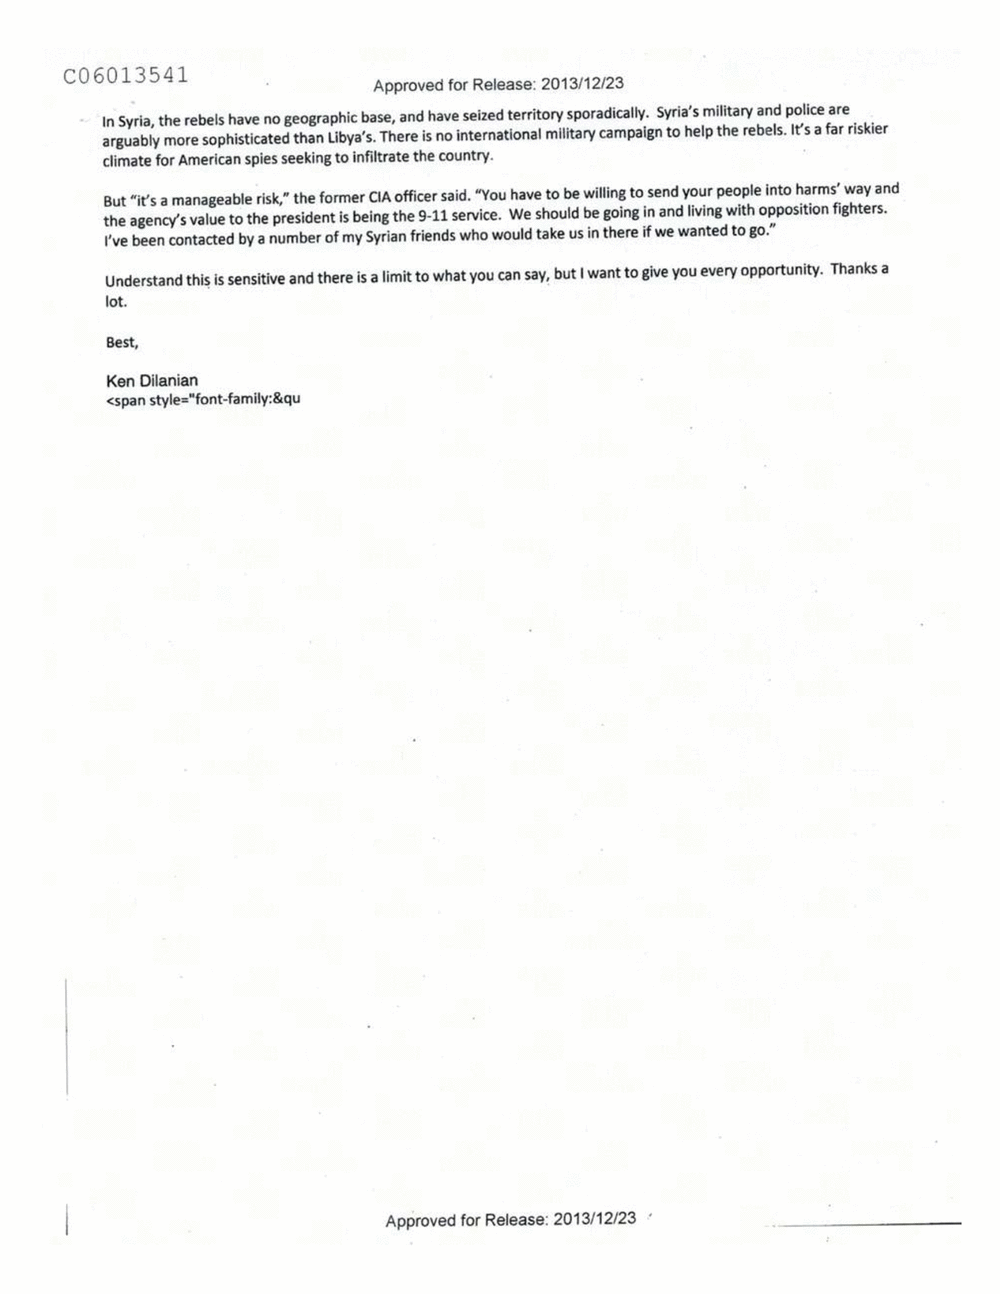 Page 398 from Email Correspondence Between Reporters and CIA Flacks